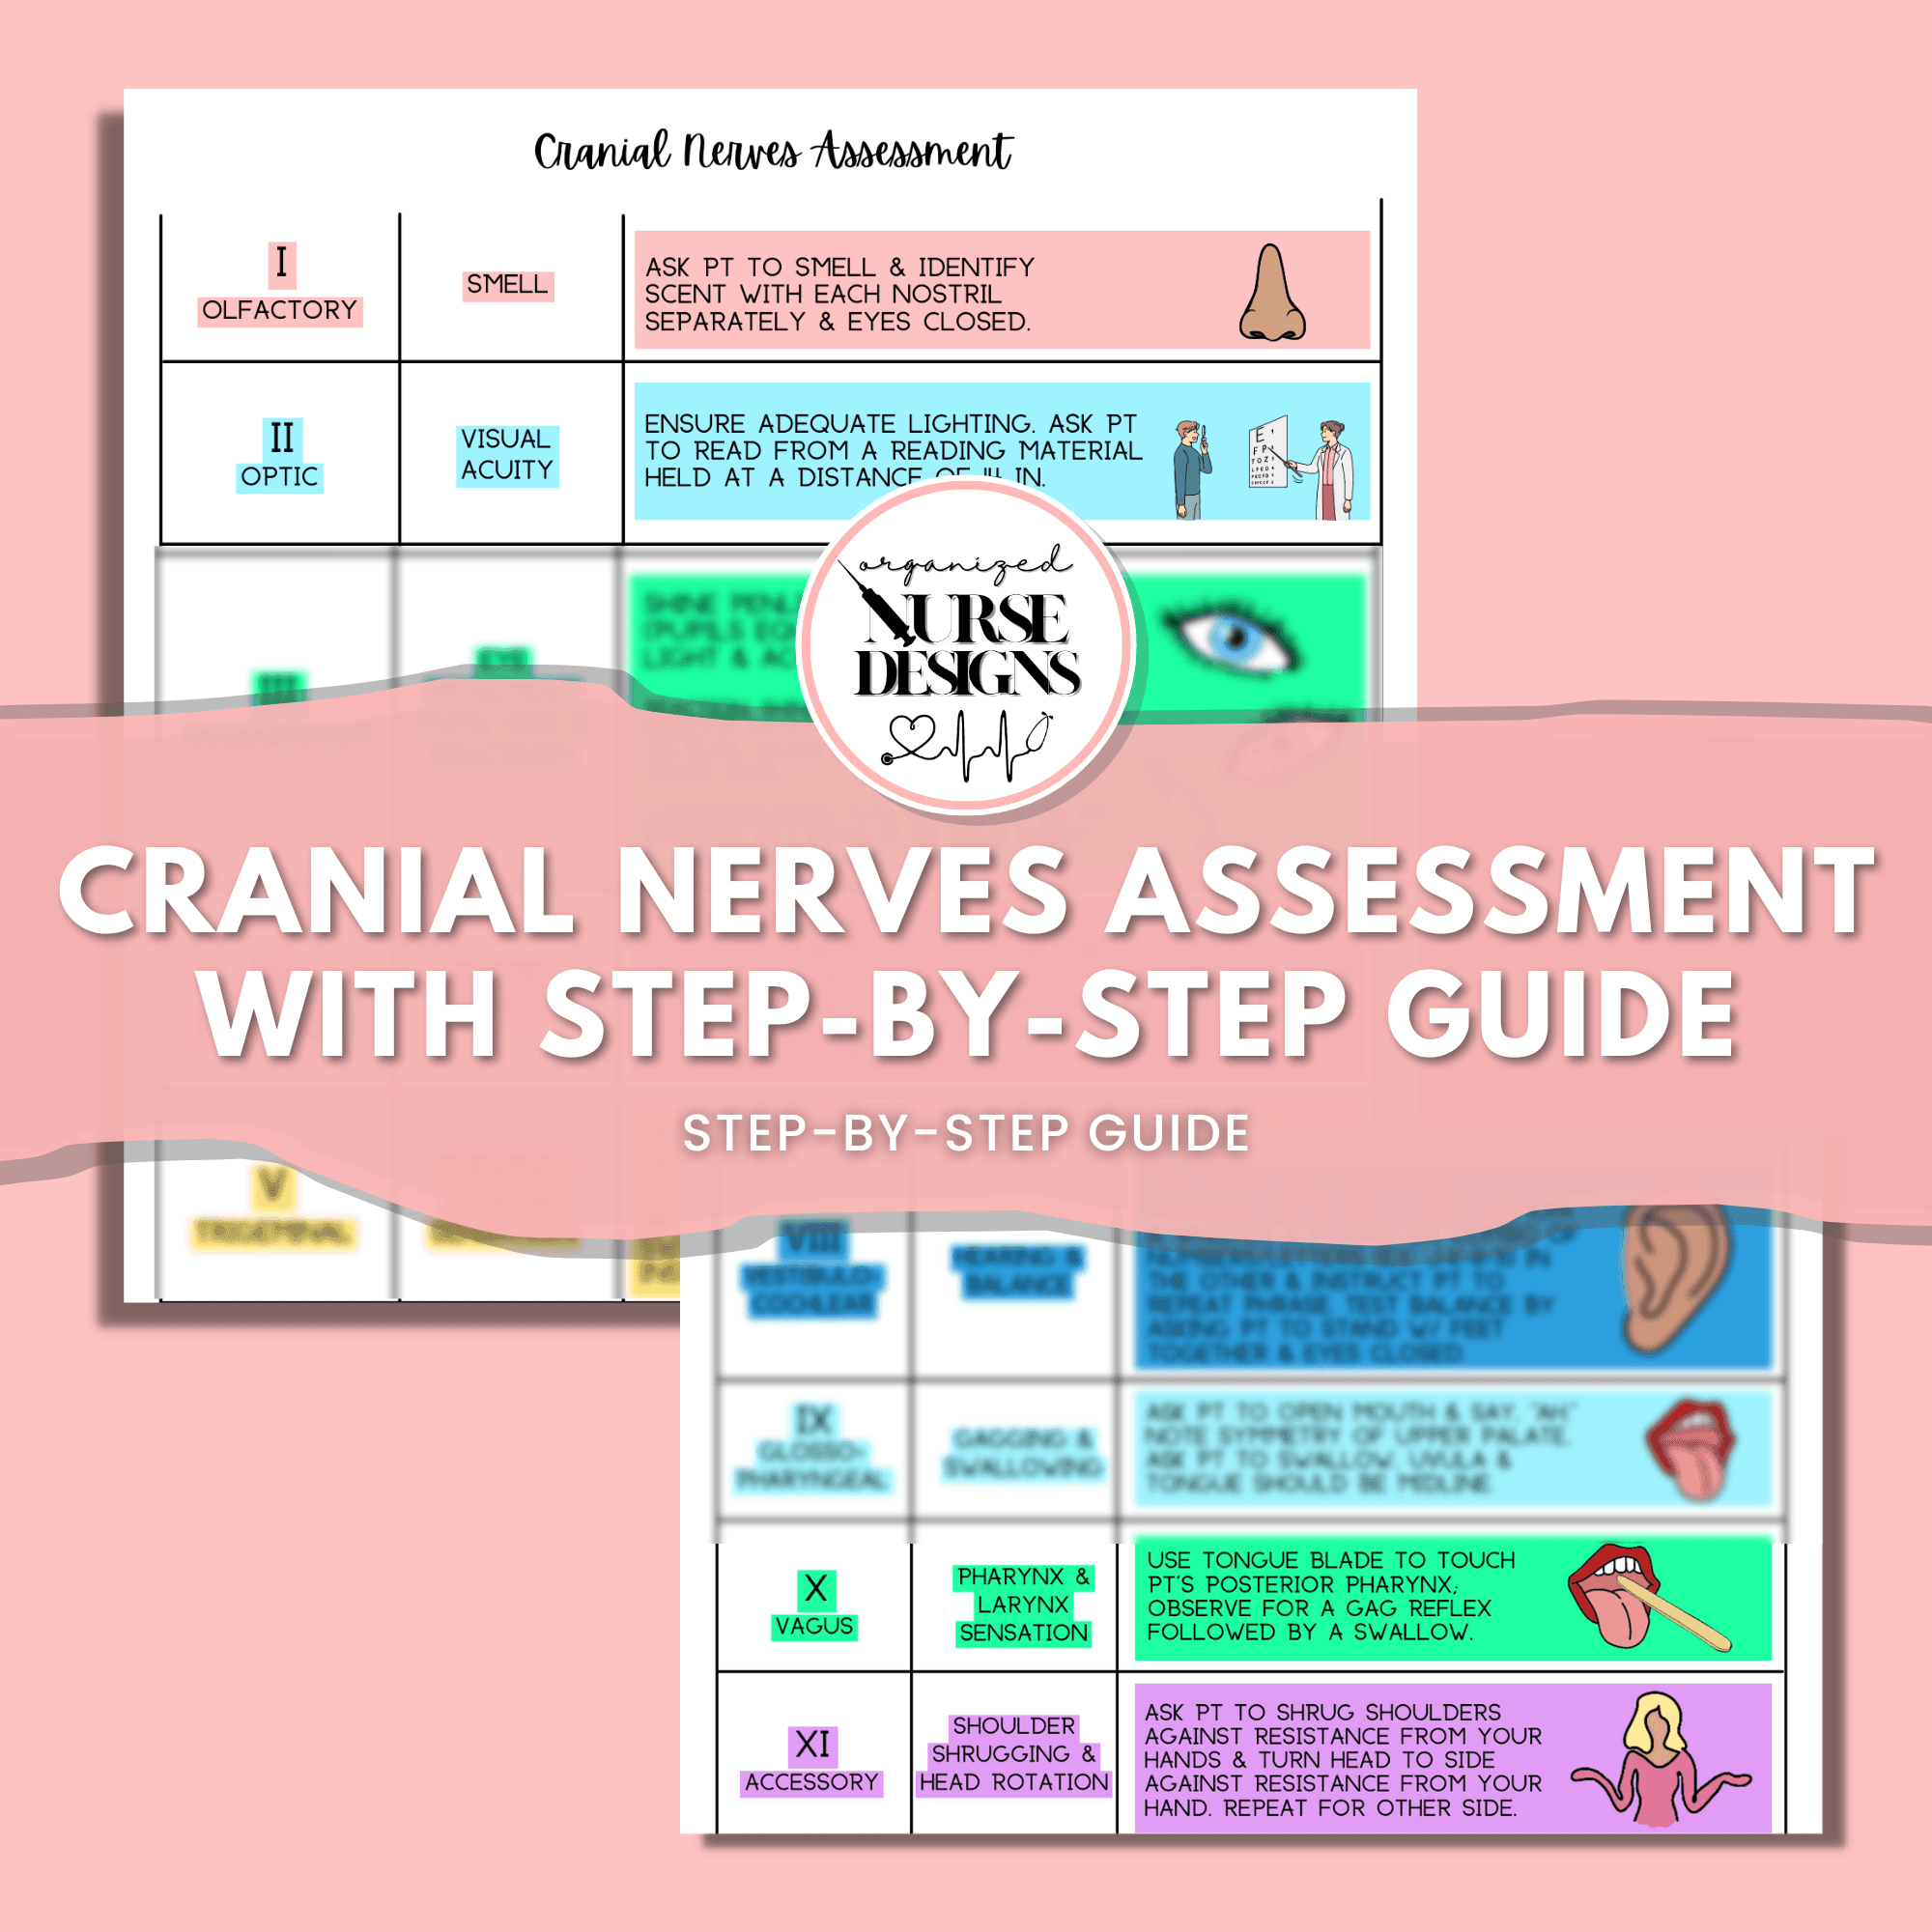 Head-to-Toe Assessment with Step-by-Step Guide for Nursing Students by OrganizedNurseDesigns